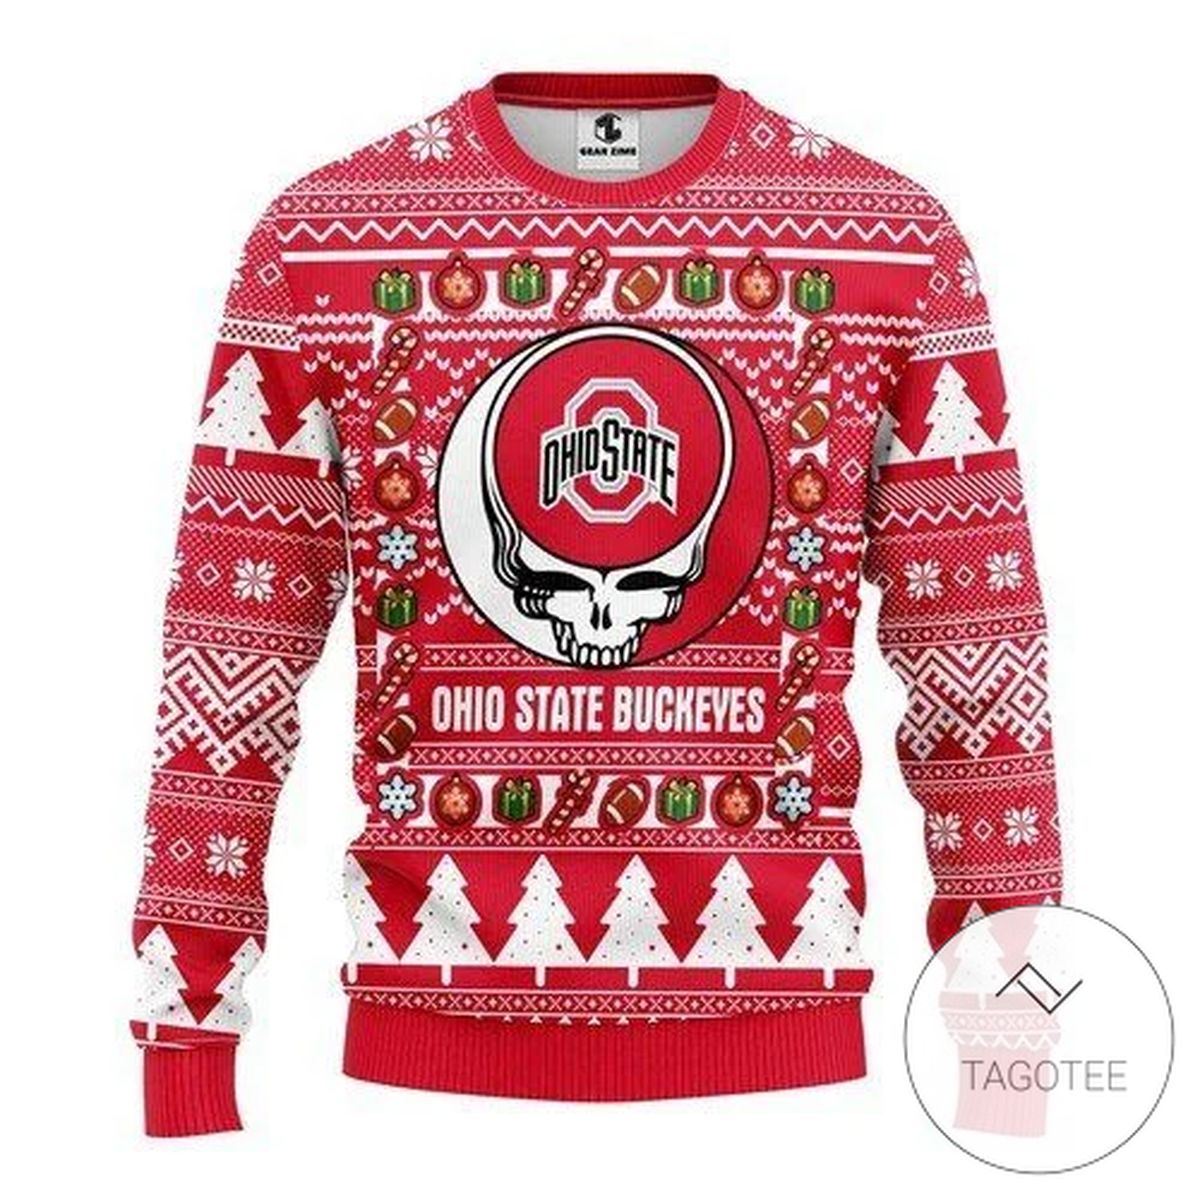 Ohio State Buckeyes Grateful Dead For Unisex Sweatshirt Knitted Ugly Christmas Sweater